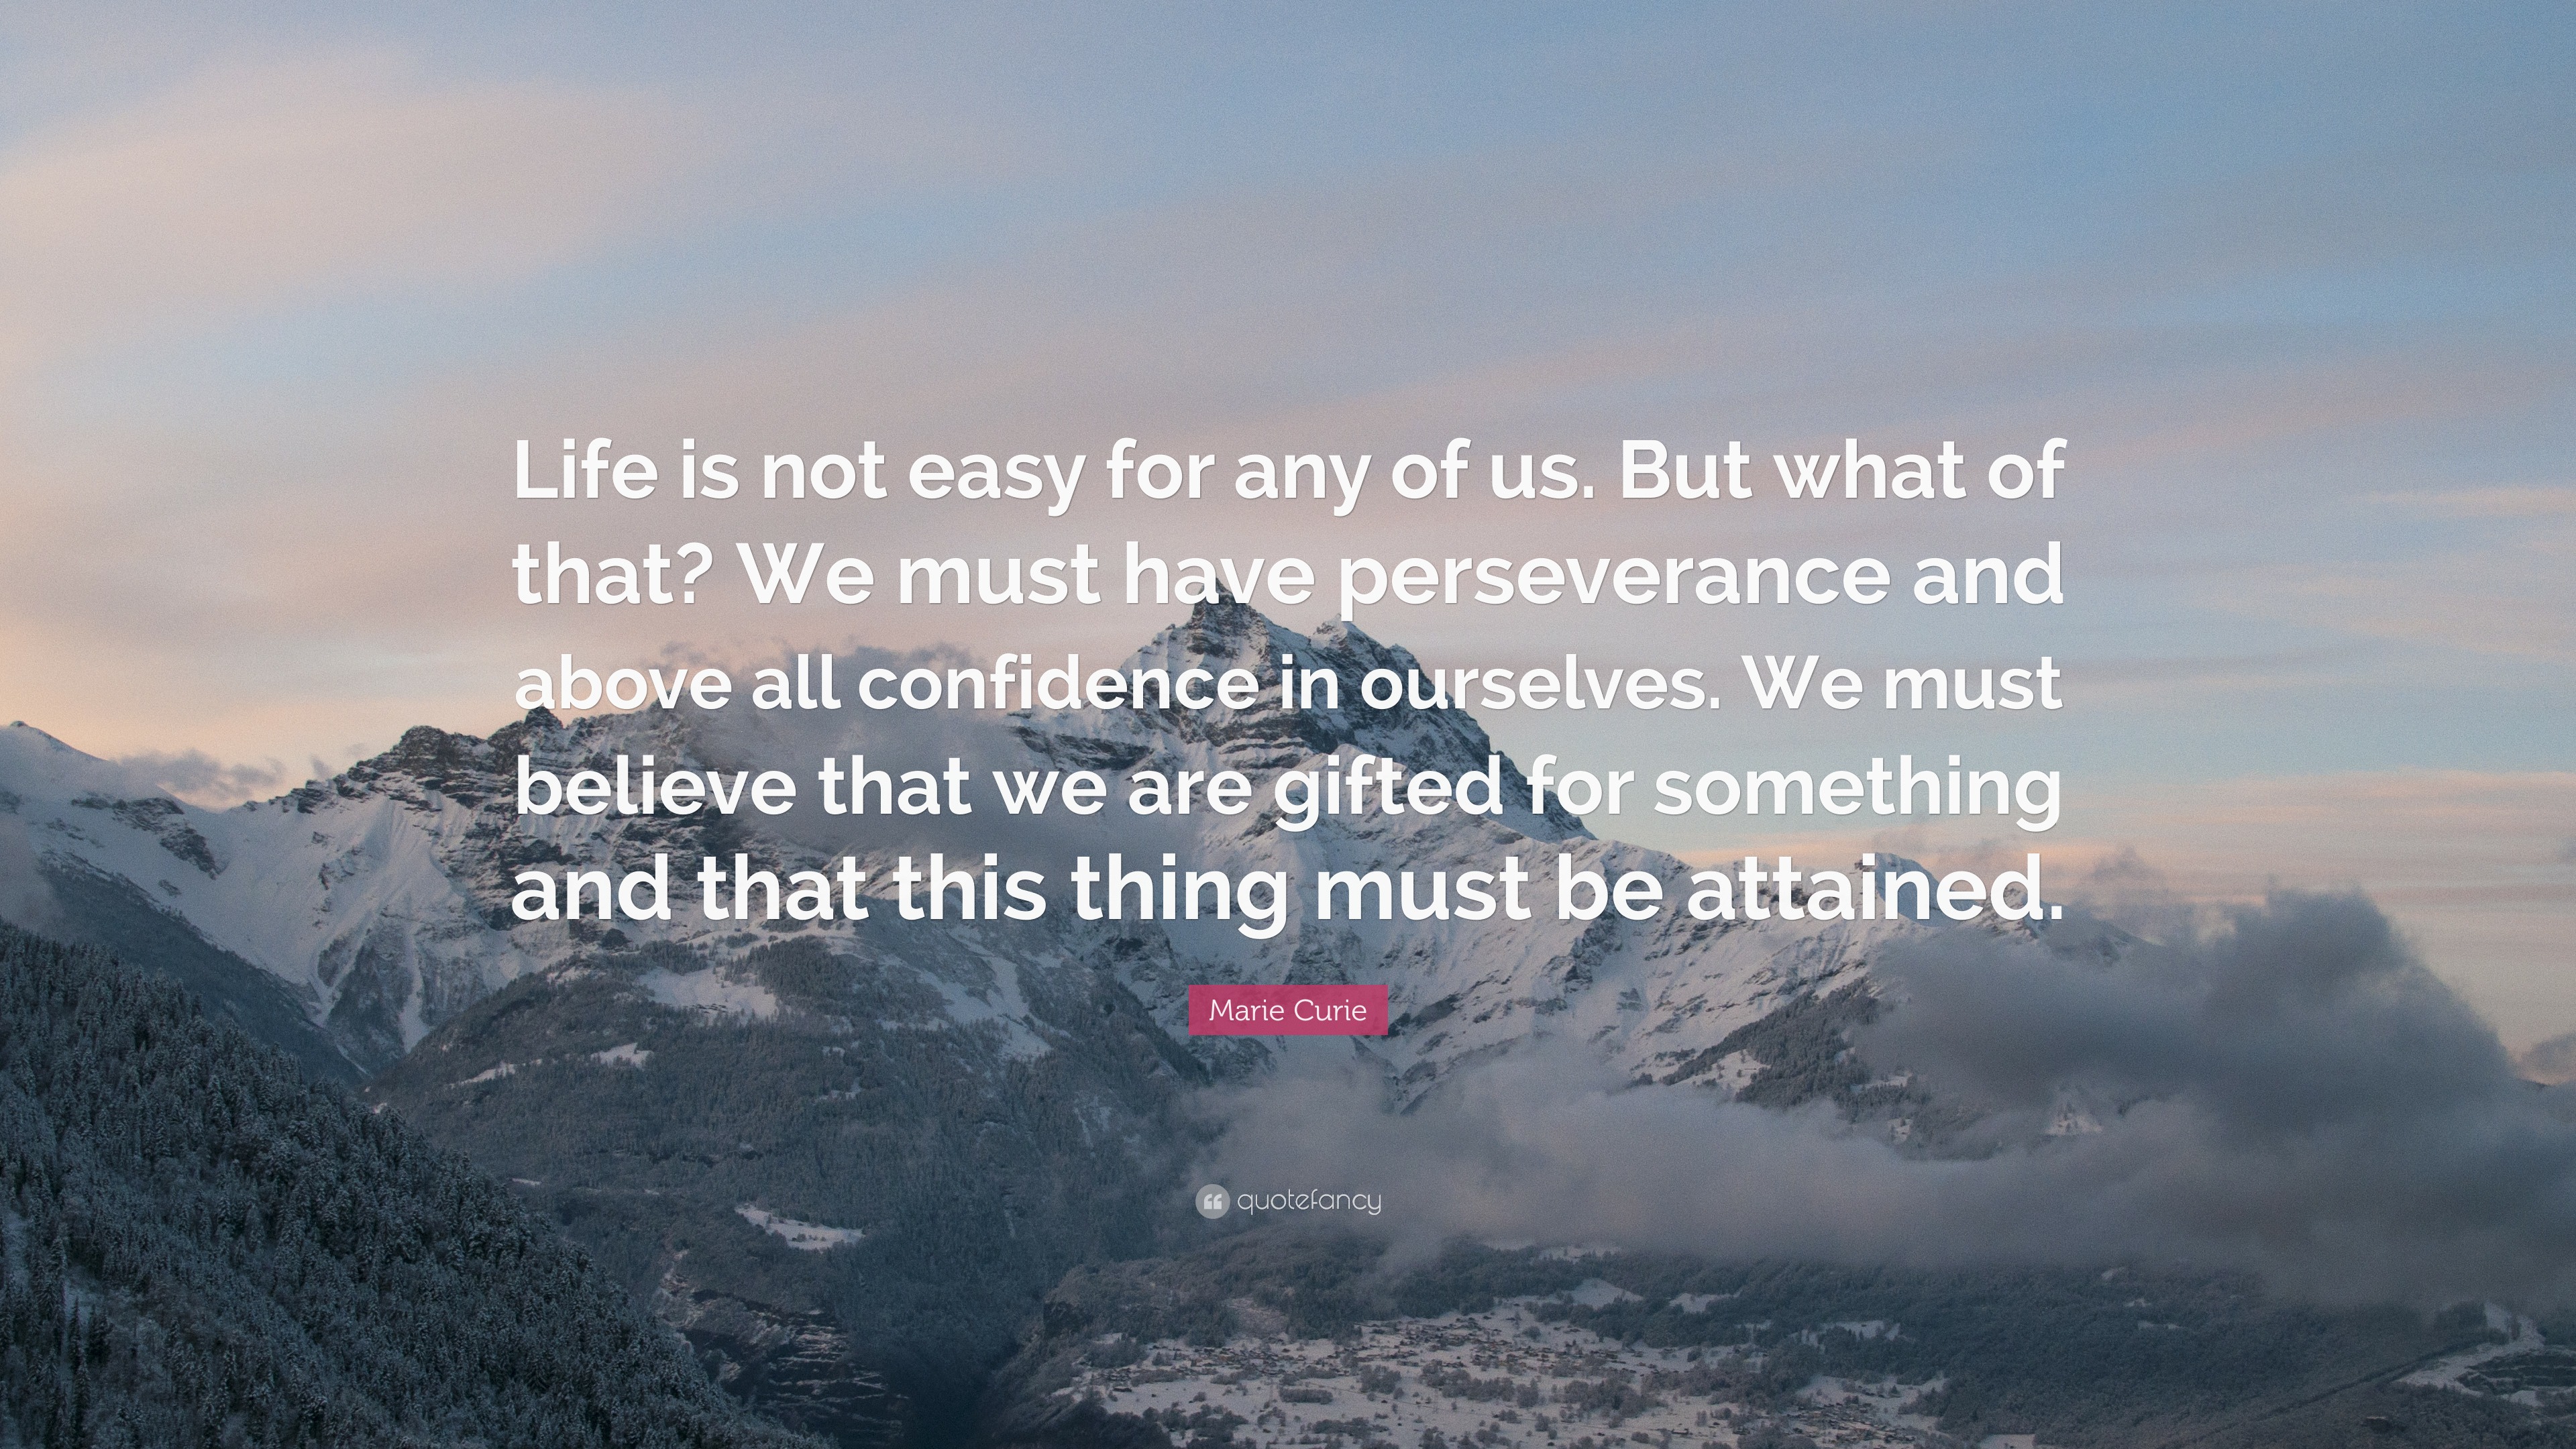 Marie Curie Quote: “Life is not easy for any of us. But what of that ...